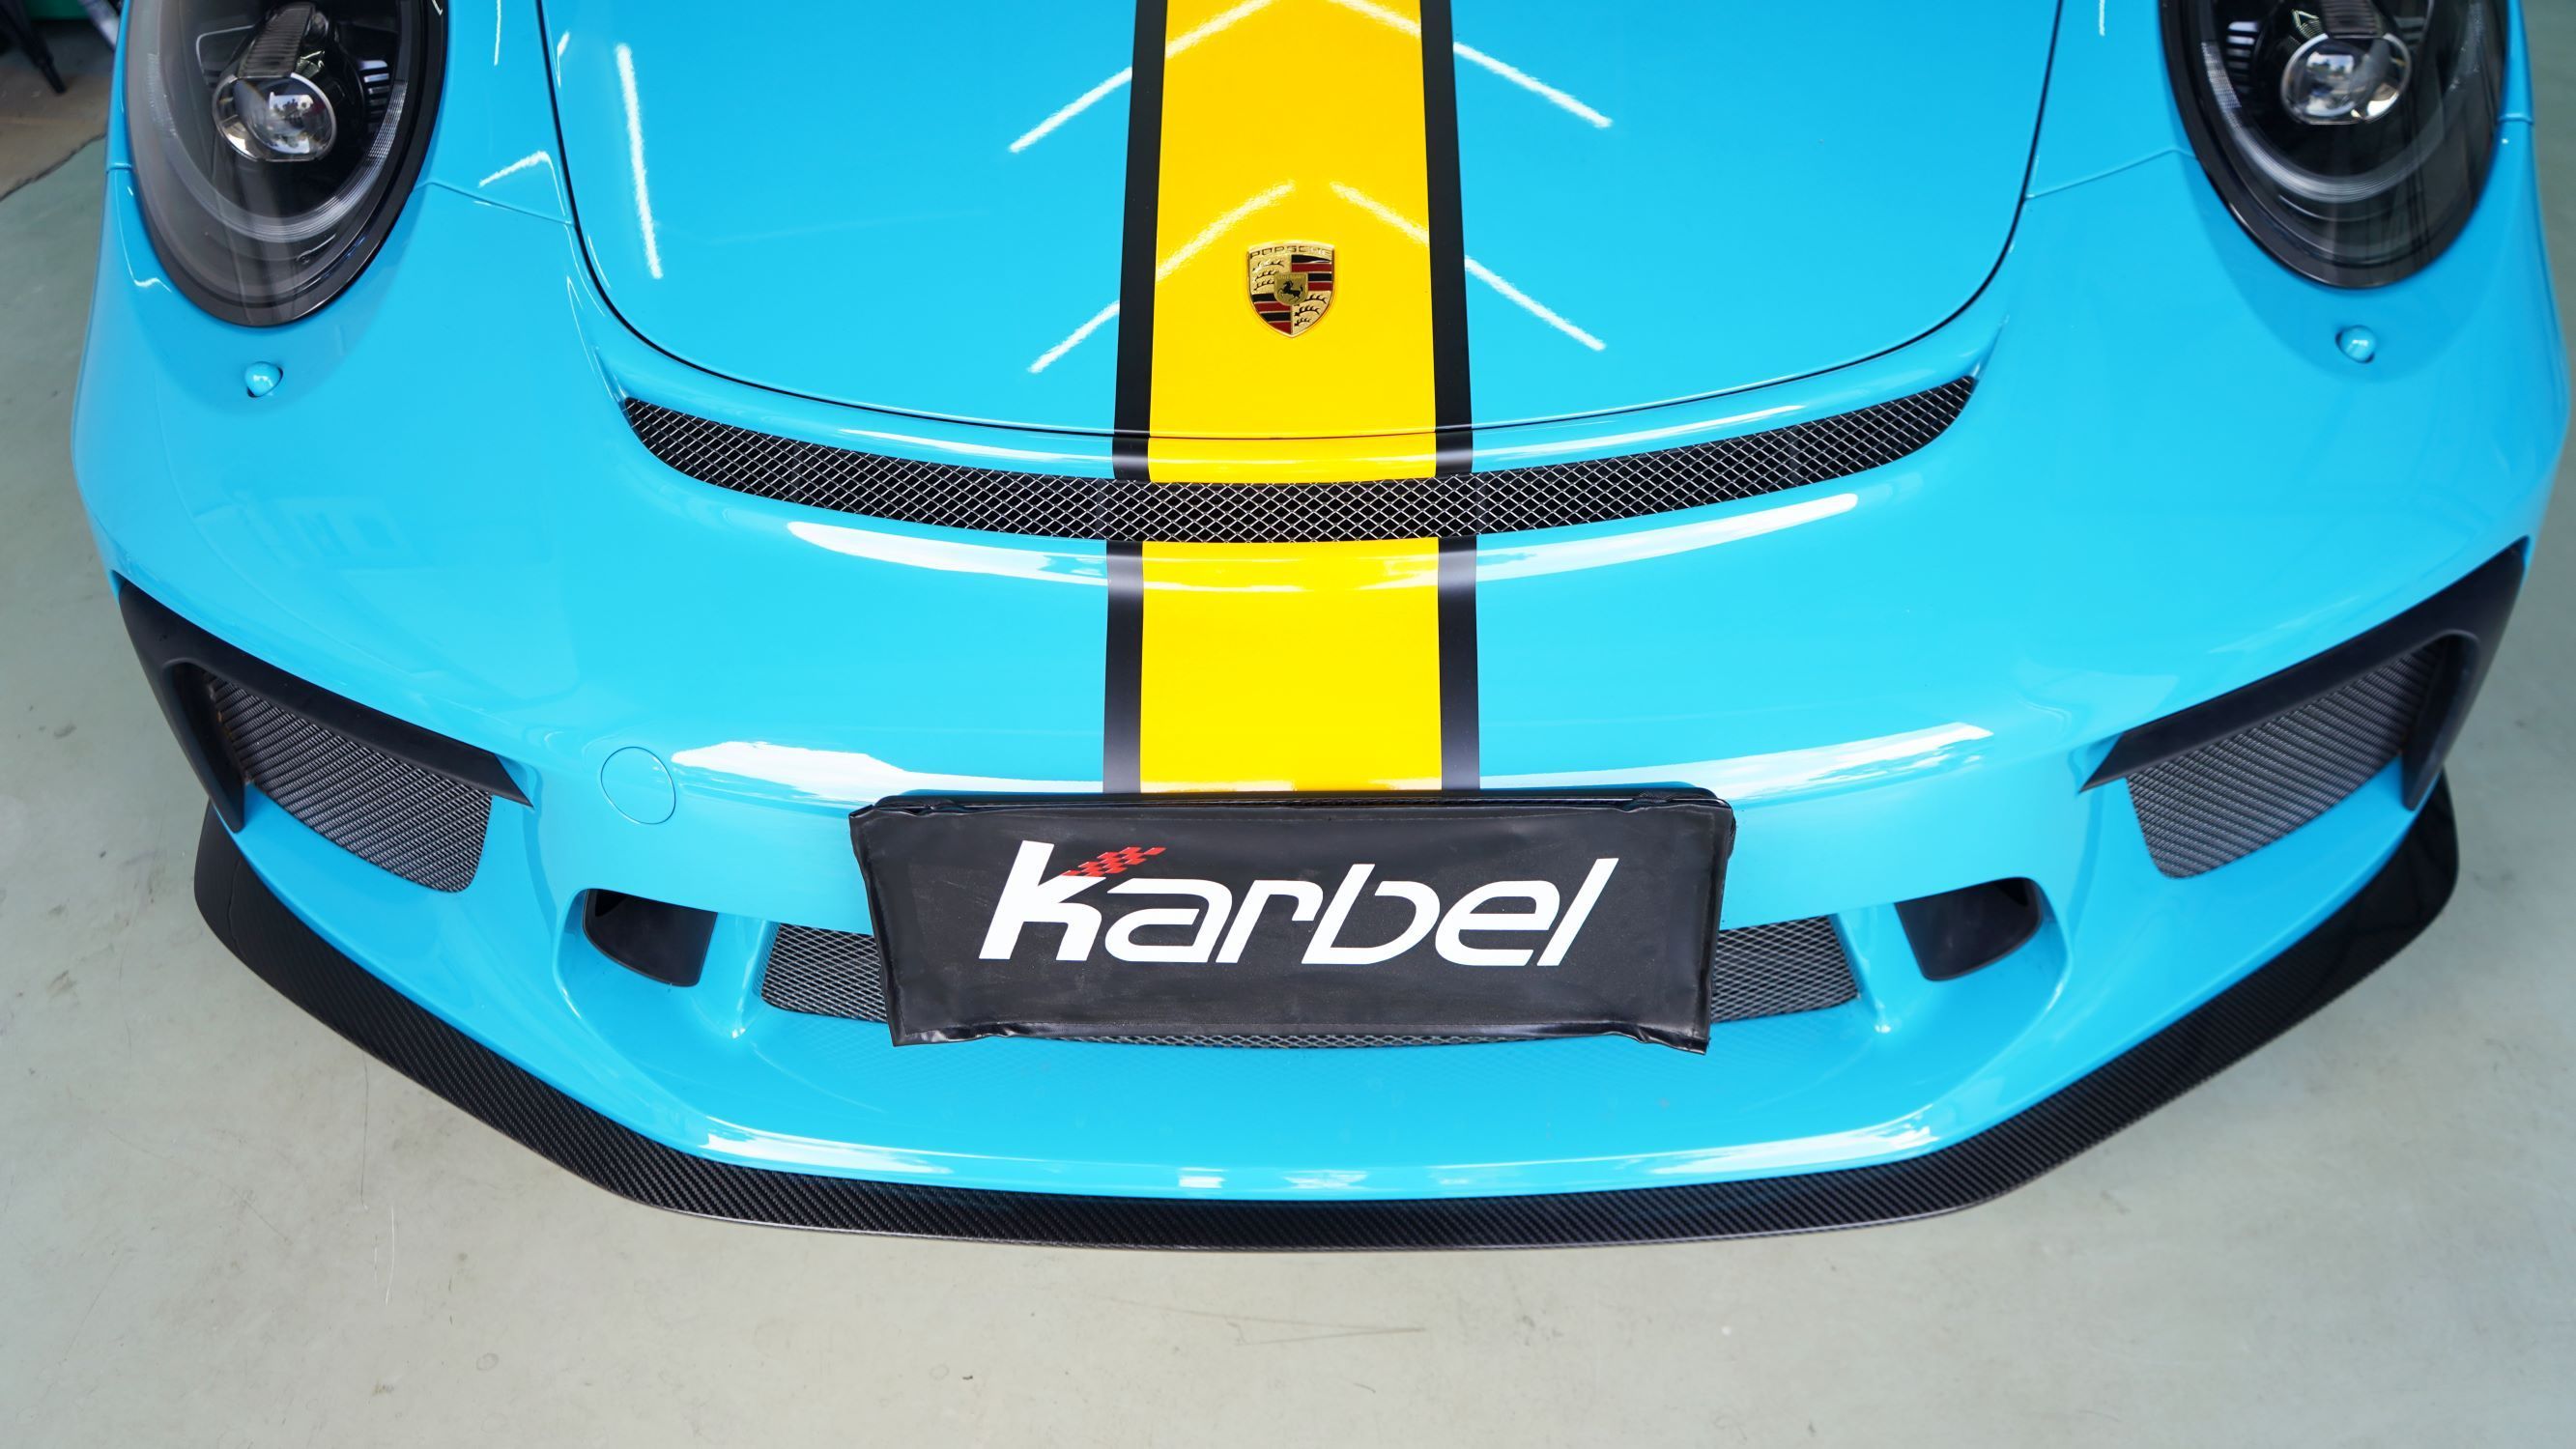 Check our price and buy a Karbel Carbon Fiber Body Kit set for Porsche 911 991.2 GT3